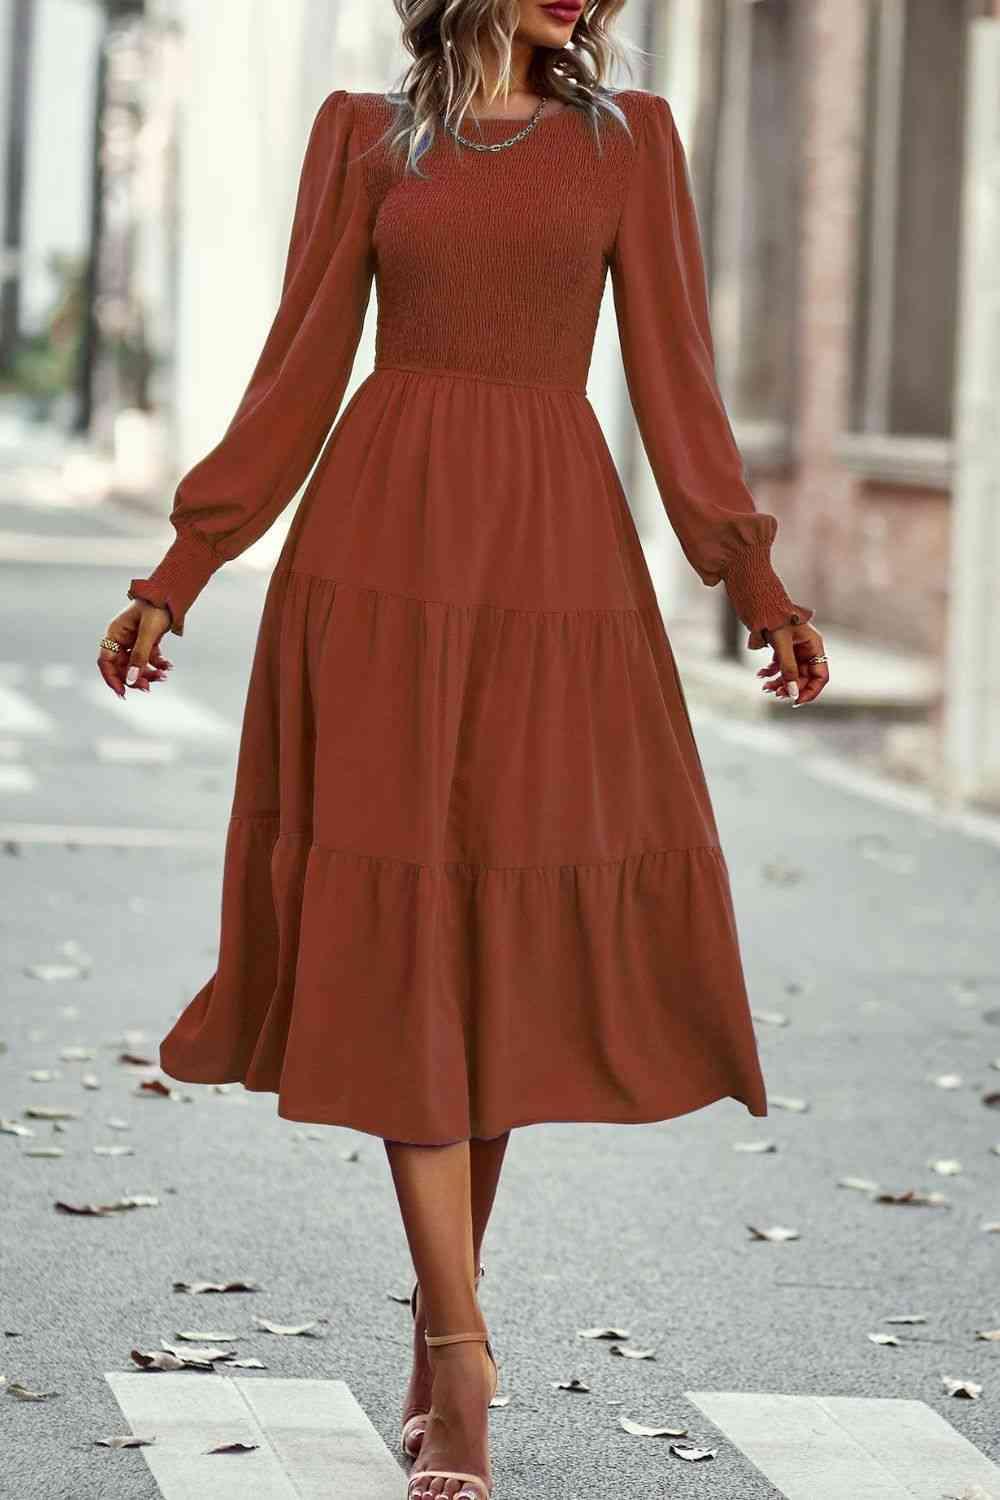 a woman in a brown dress is walking down the street